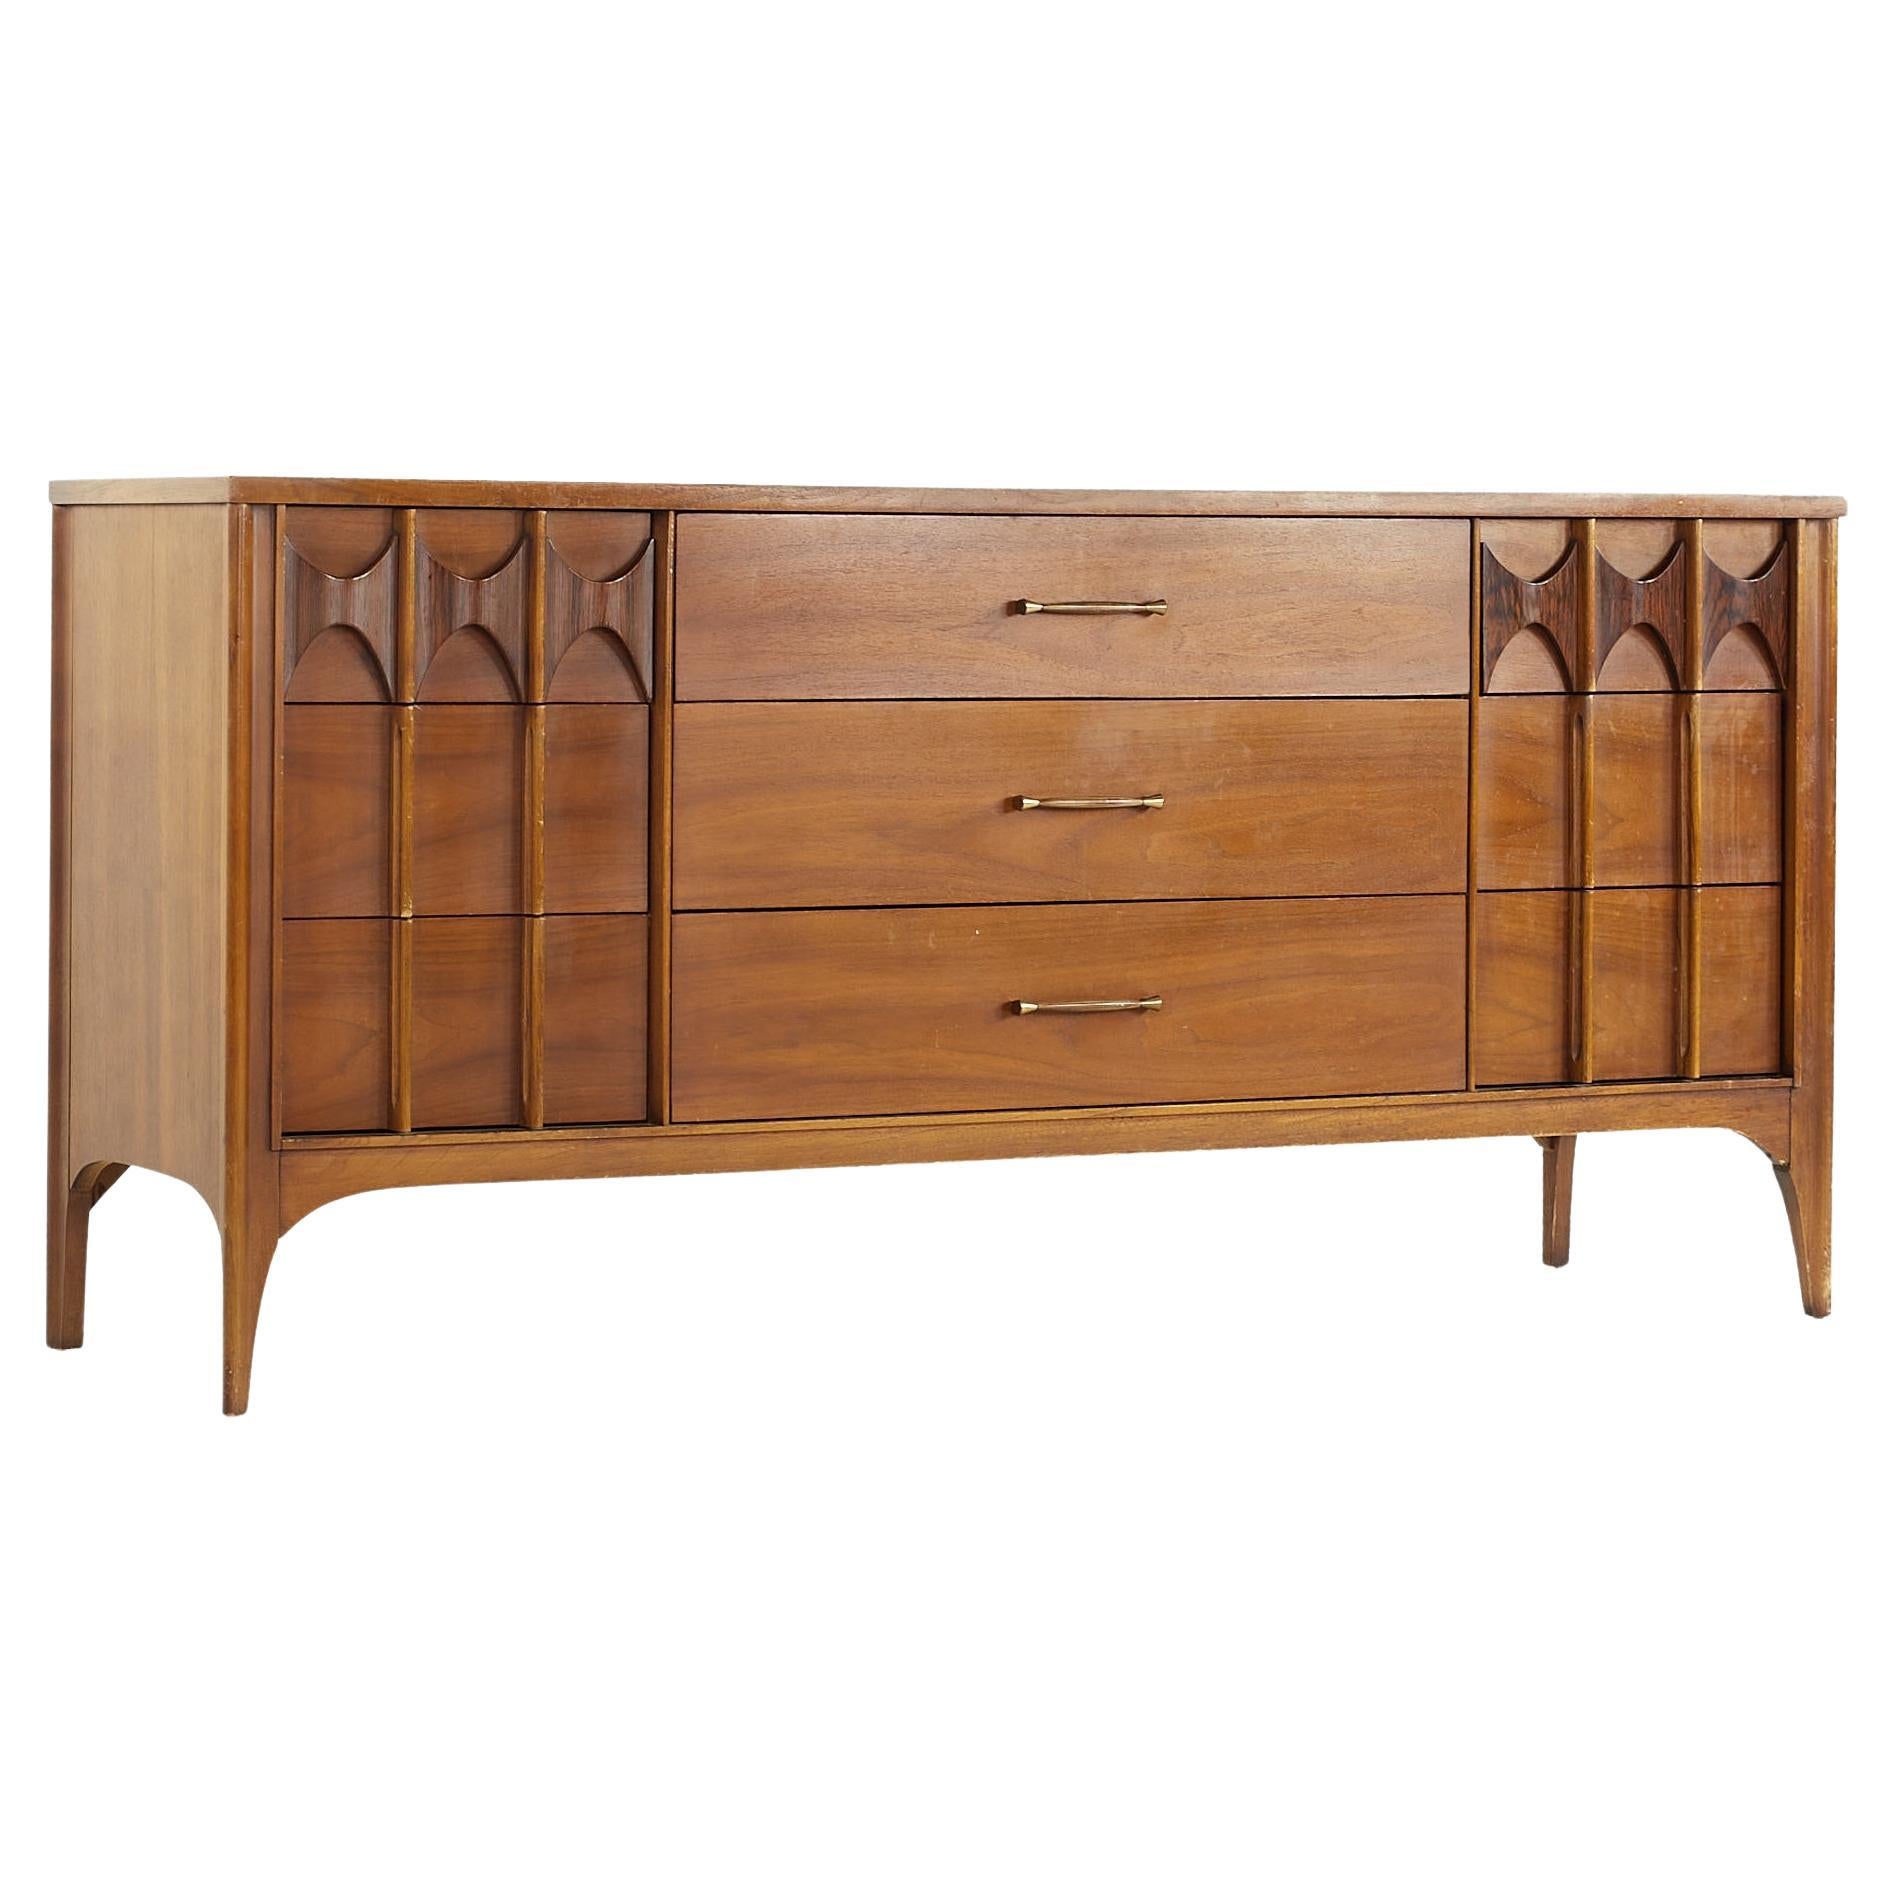 Kent Coffey Perspecta Midcentury Walnut and Rosewood 9 Drawer Lowboy Dresser For Sale